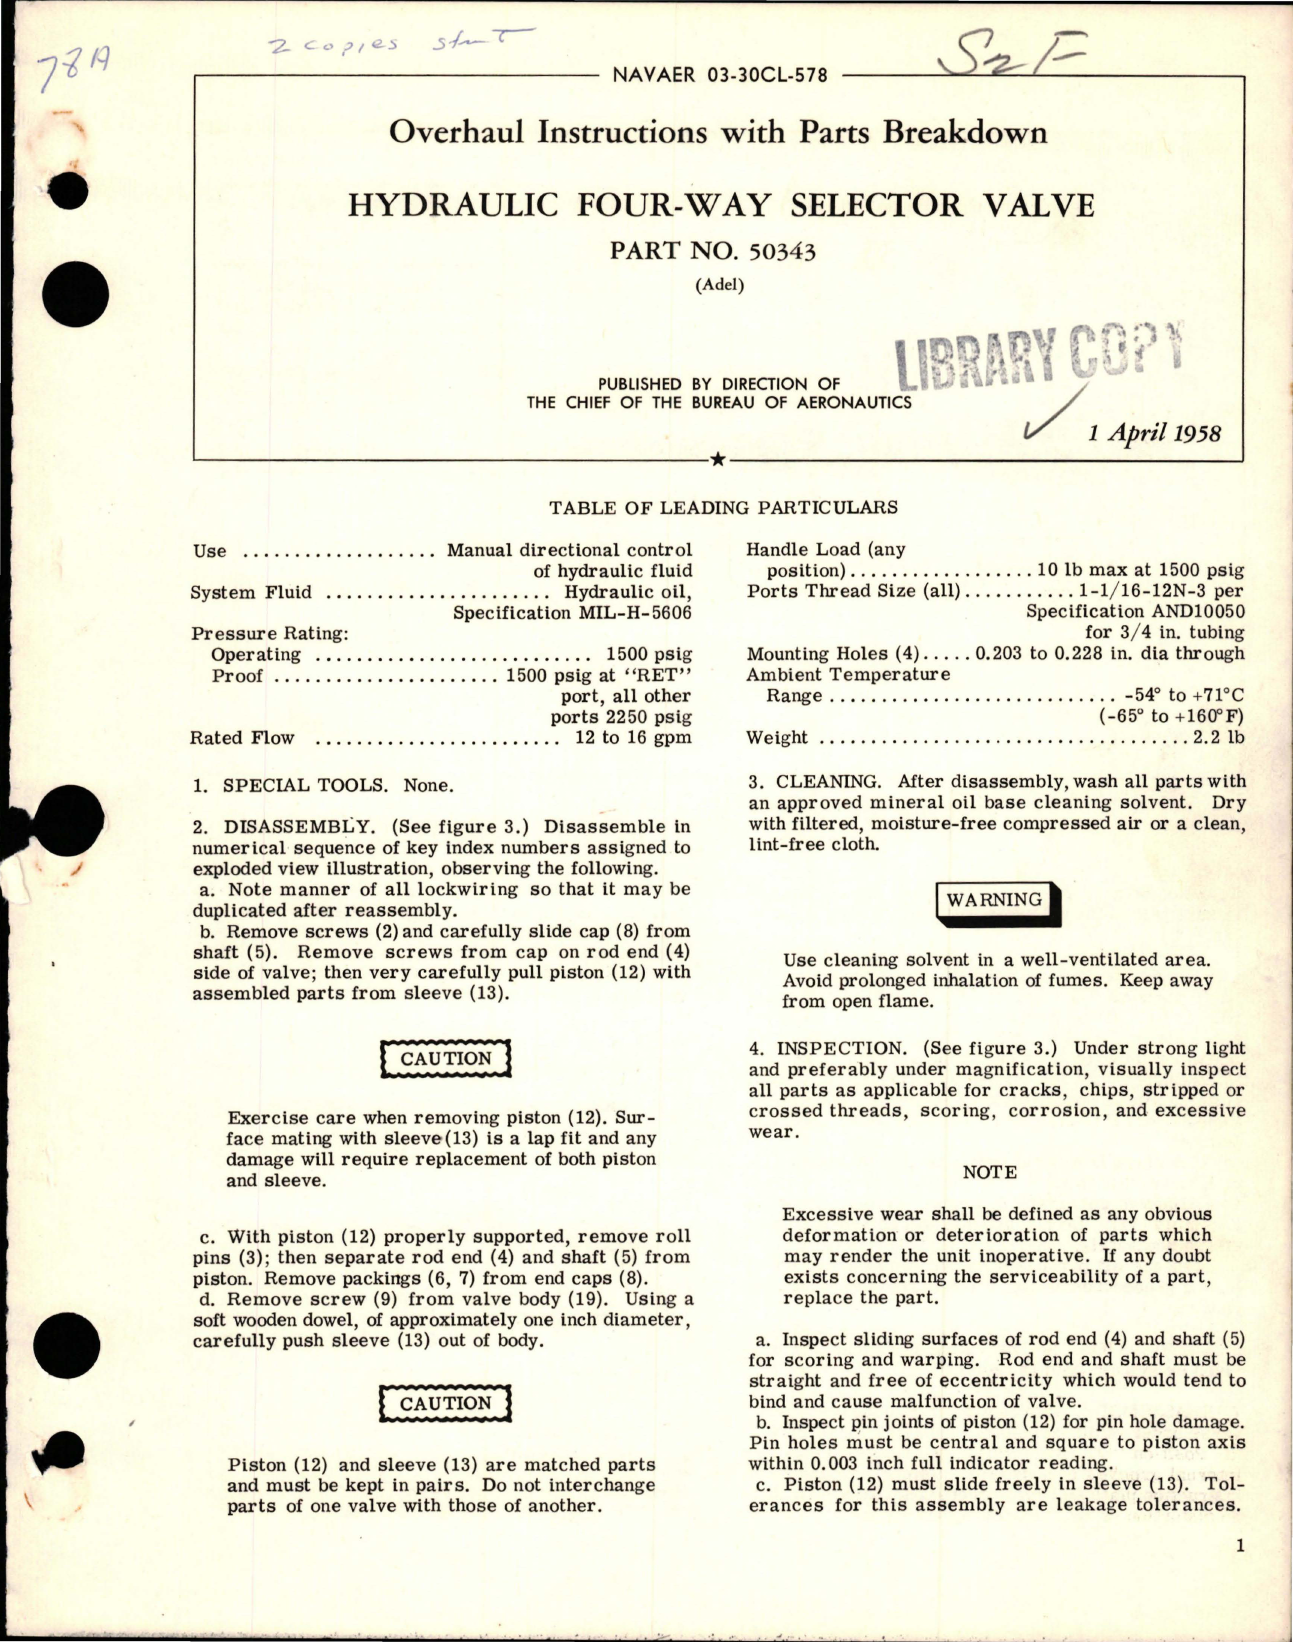 Sample page 1 from AirCorps Library document: Overhaul Instructions w Parts for Hydraulic Four-Way Selector Valve - Part 50343 